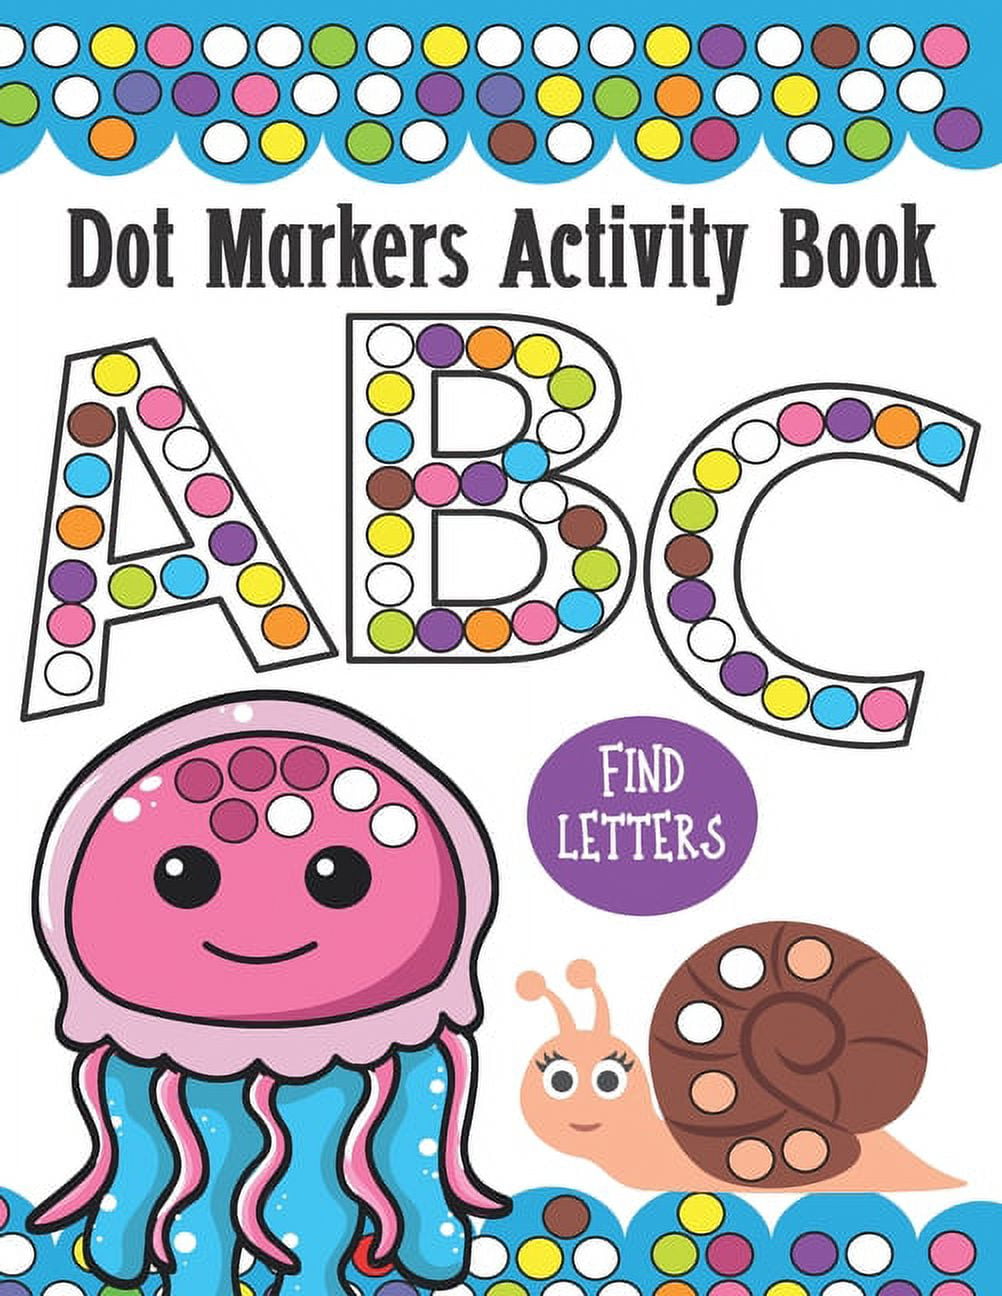 Dot Markers Activity Book ABC Letters Graphic by ANOUAR BOUATAOUN31 ·  Creative Fabrica